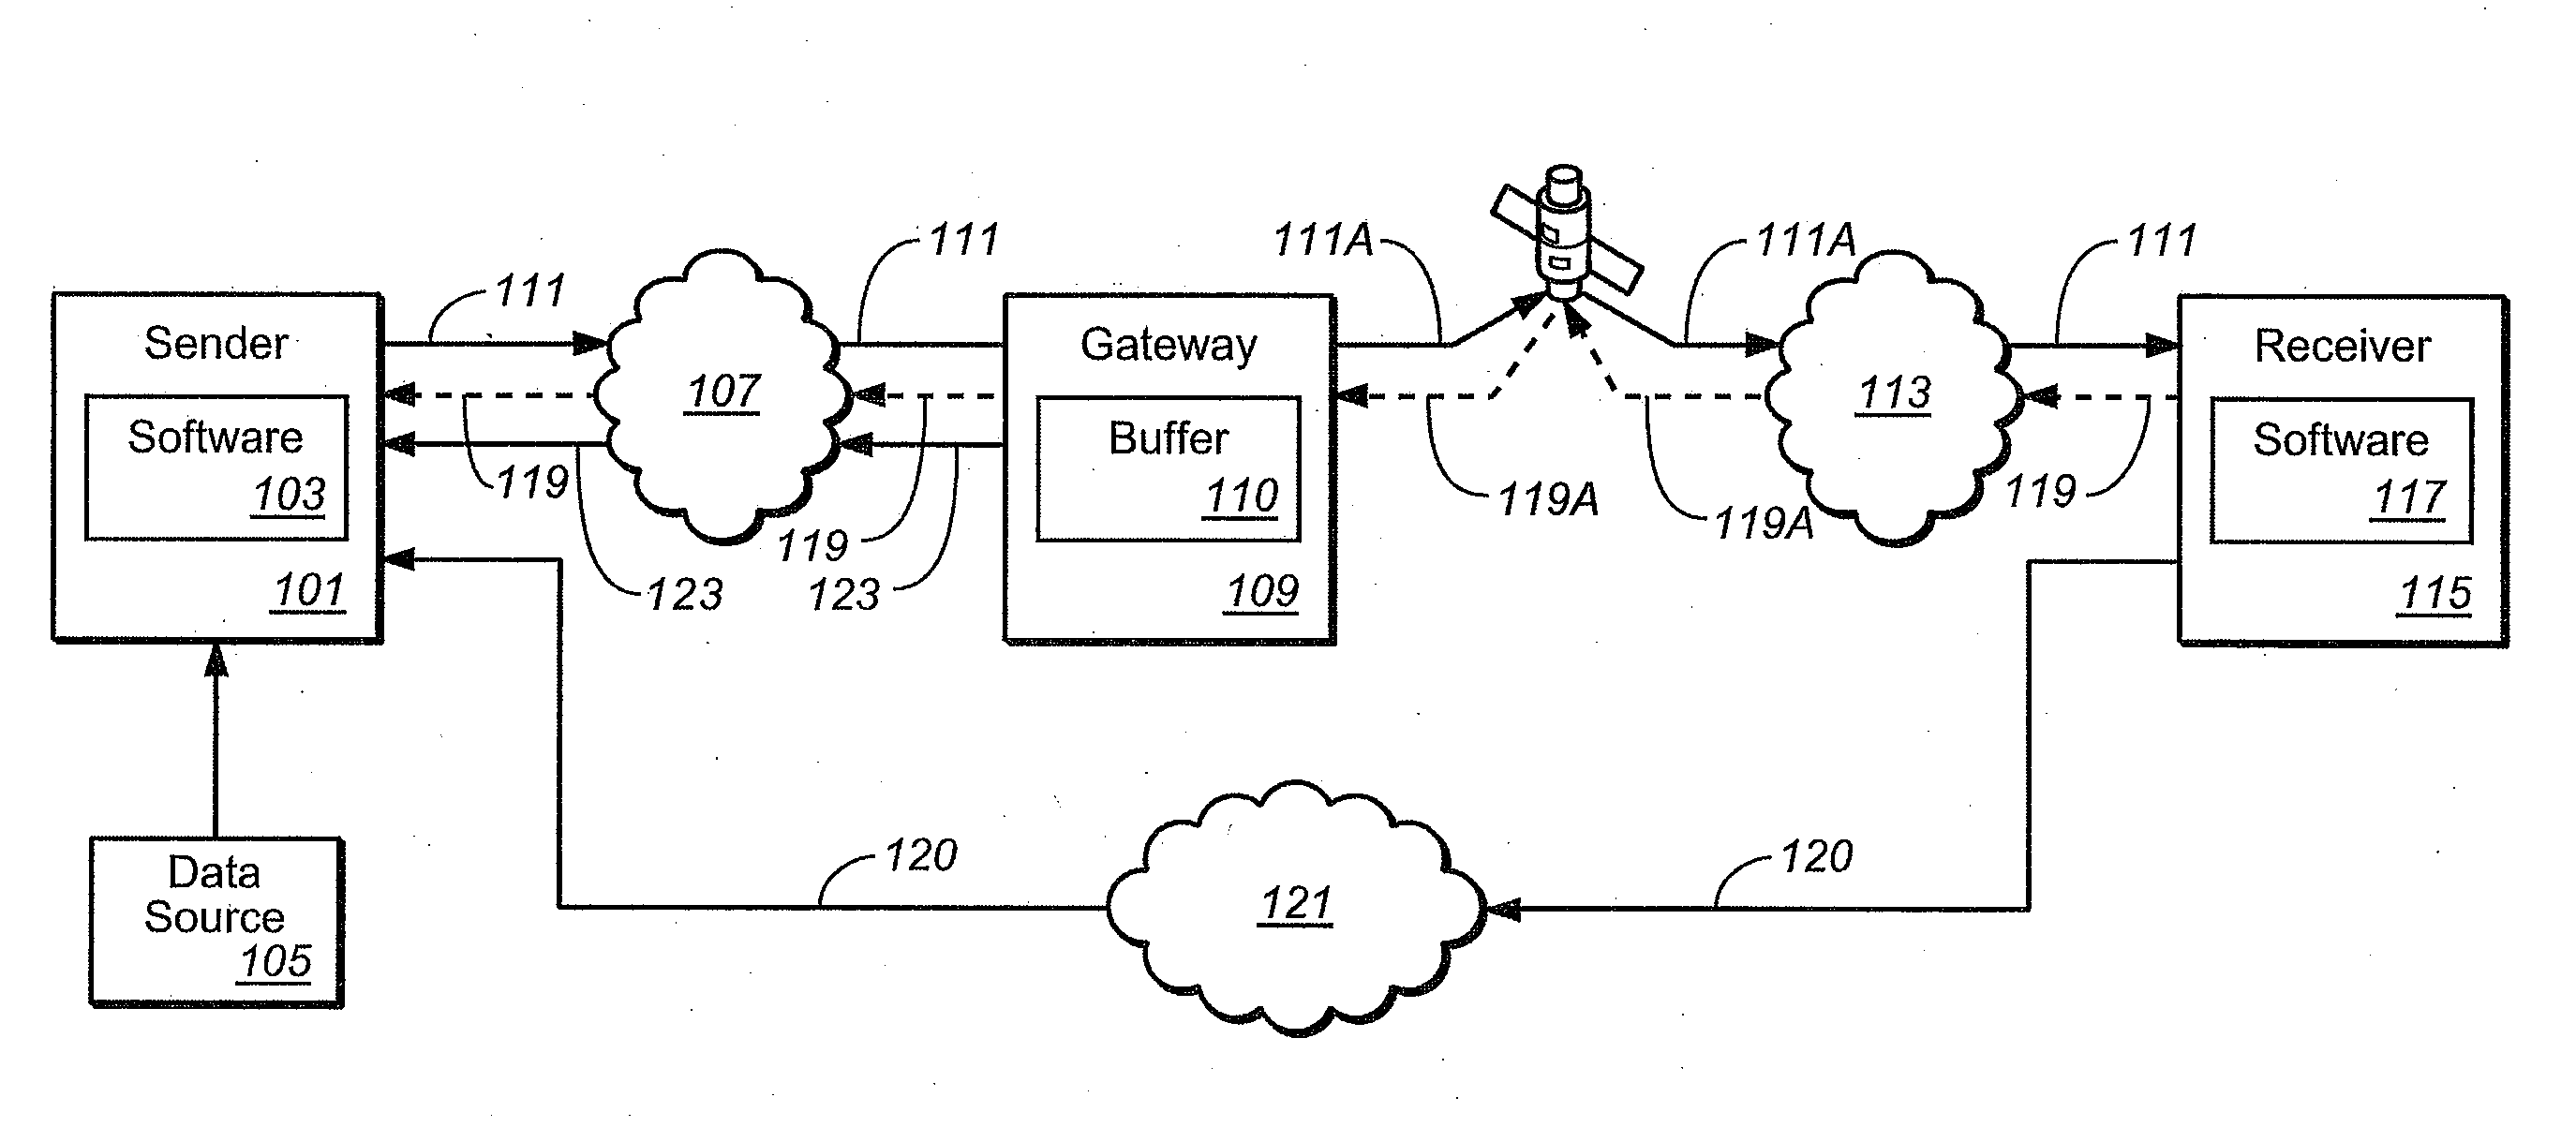 Fault-tolerant data transmission system for networks with non-full-duplex or asymmetric transport